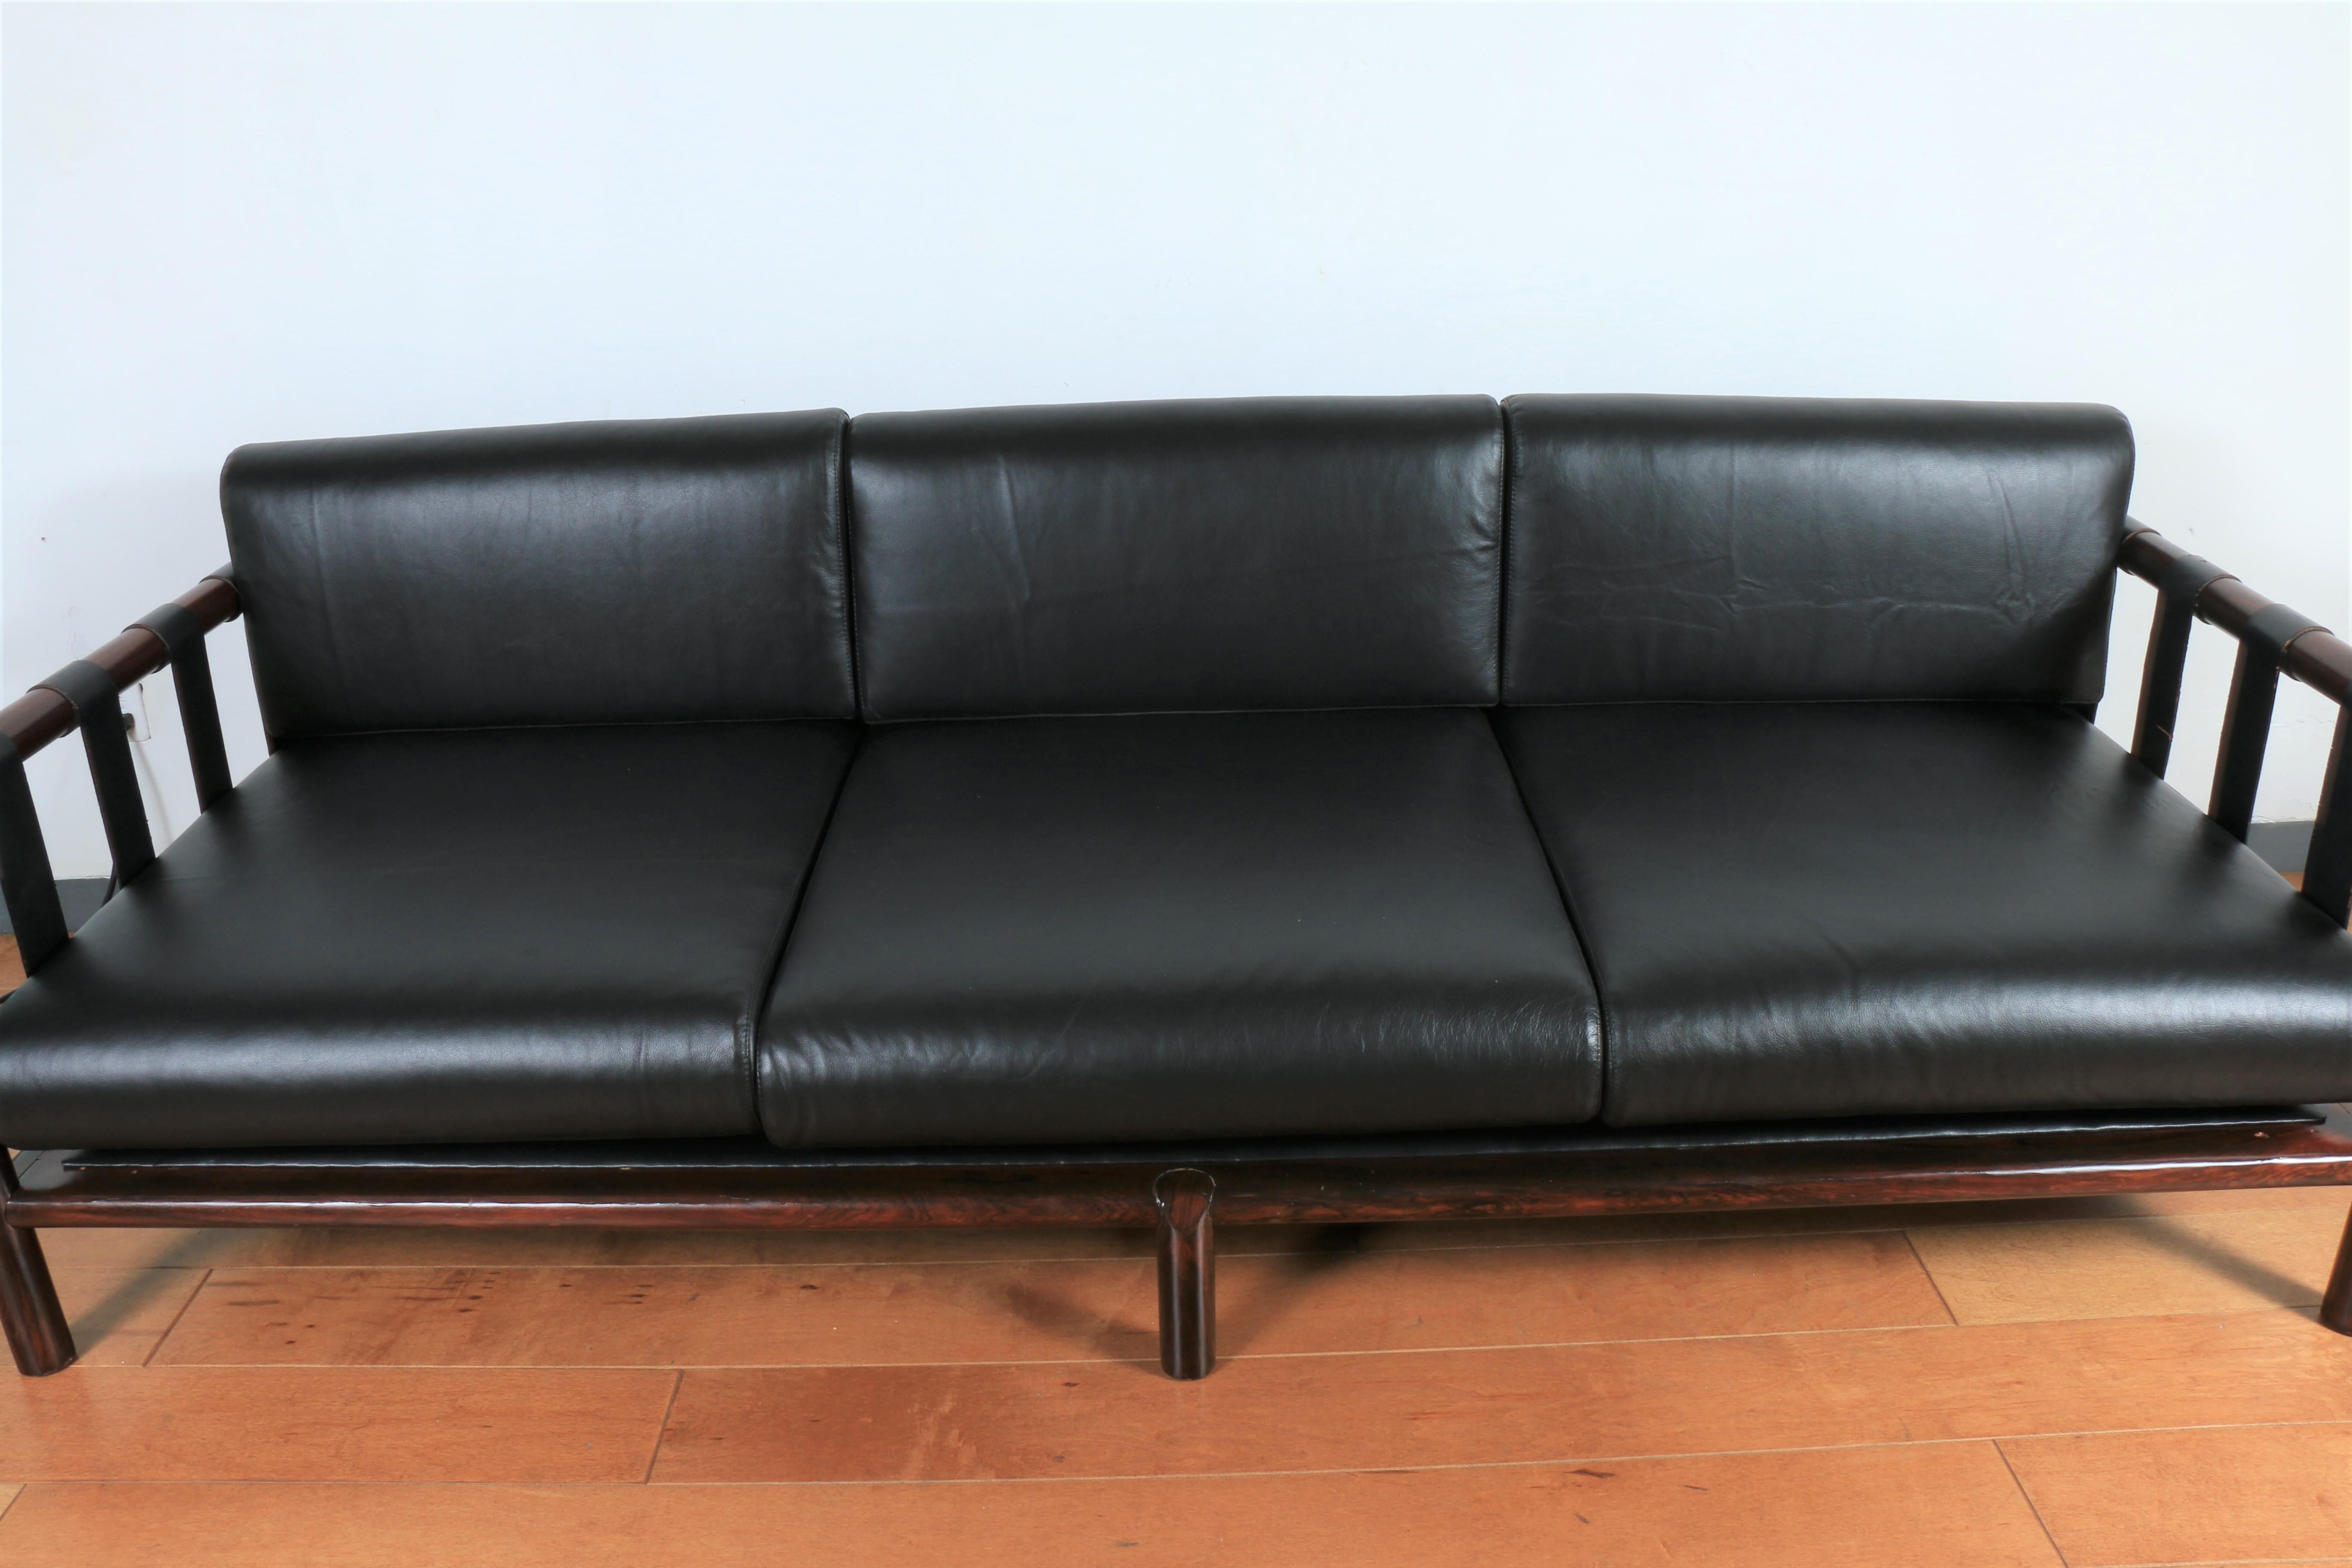 Danish rosewood leather sofa. This sofa was reupholstered and refinished. Looks like a Brazilian style sofa but can be Danish. Super comfortable and good looking. Amazing rosewood grain. Real well-kept leather.